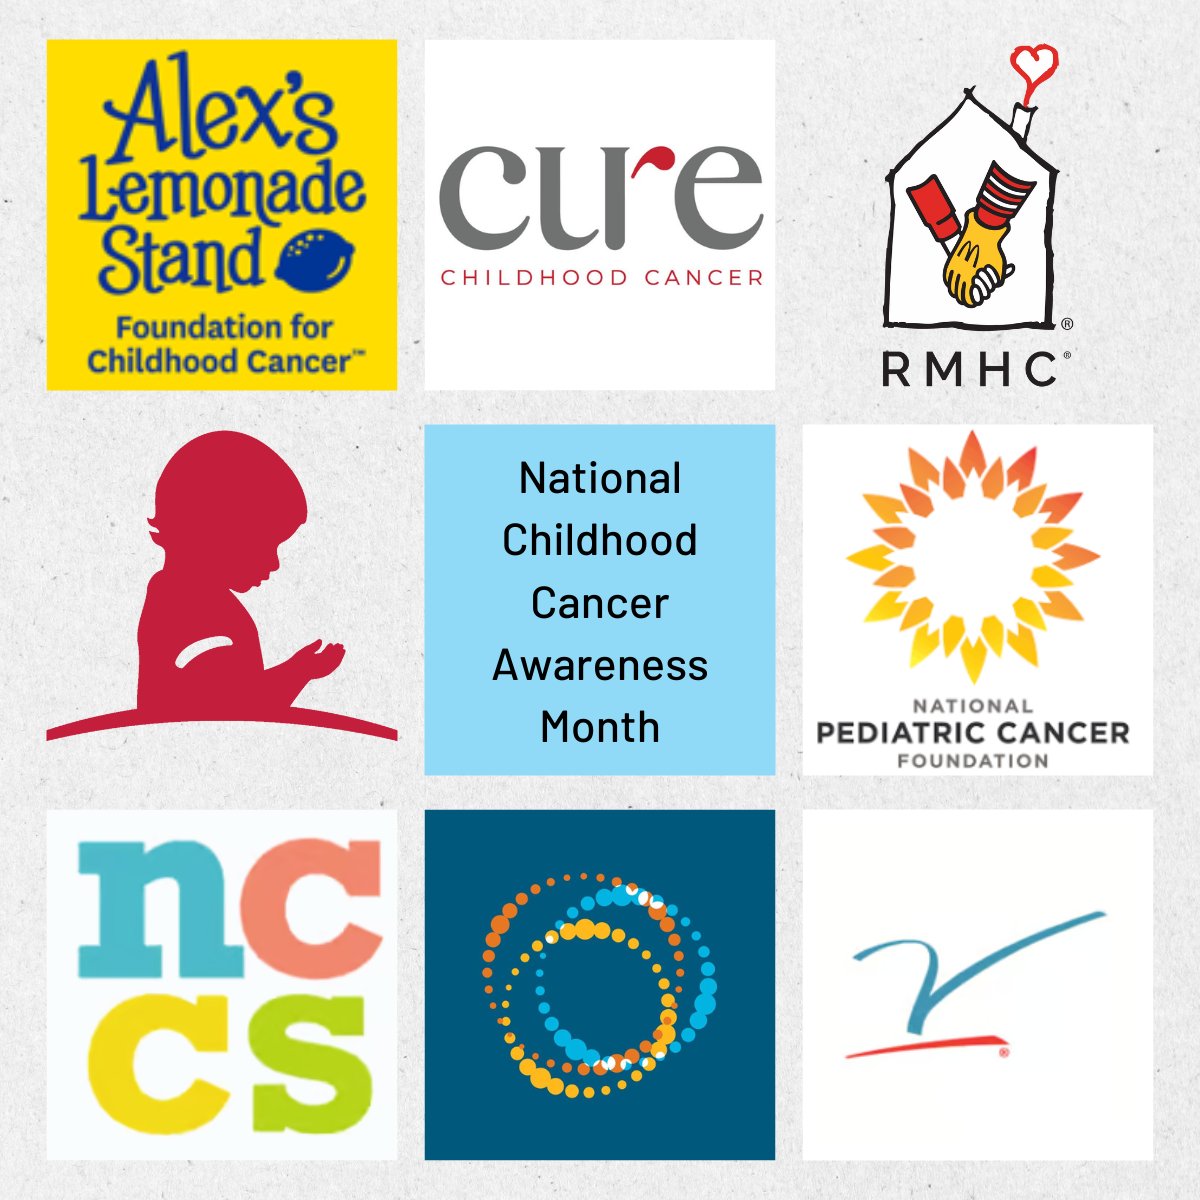 This #NationalChildhoodCancerAwarenessMonth, we recognize and honor the brave young fighters out there by highlighting a few of the many amazing orgs making a difference.
@AlexsLemonade @TheVFoundation @RMHC @CUREchildcancer @PediatricCancer @livestrong @StJude @theNCCS